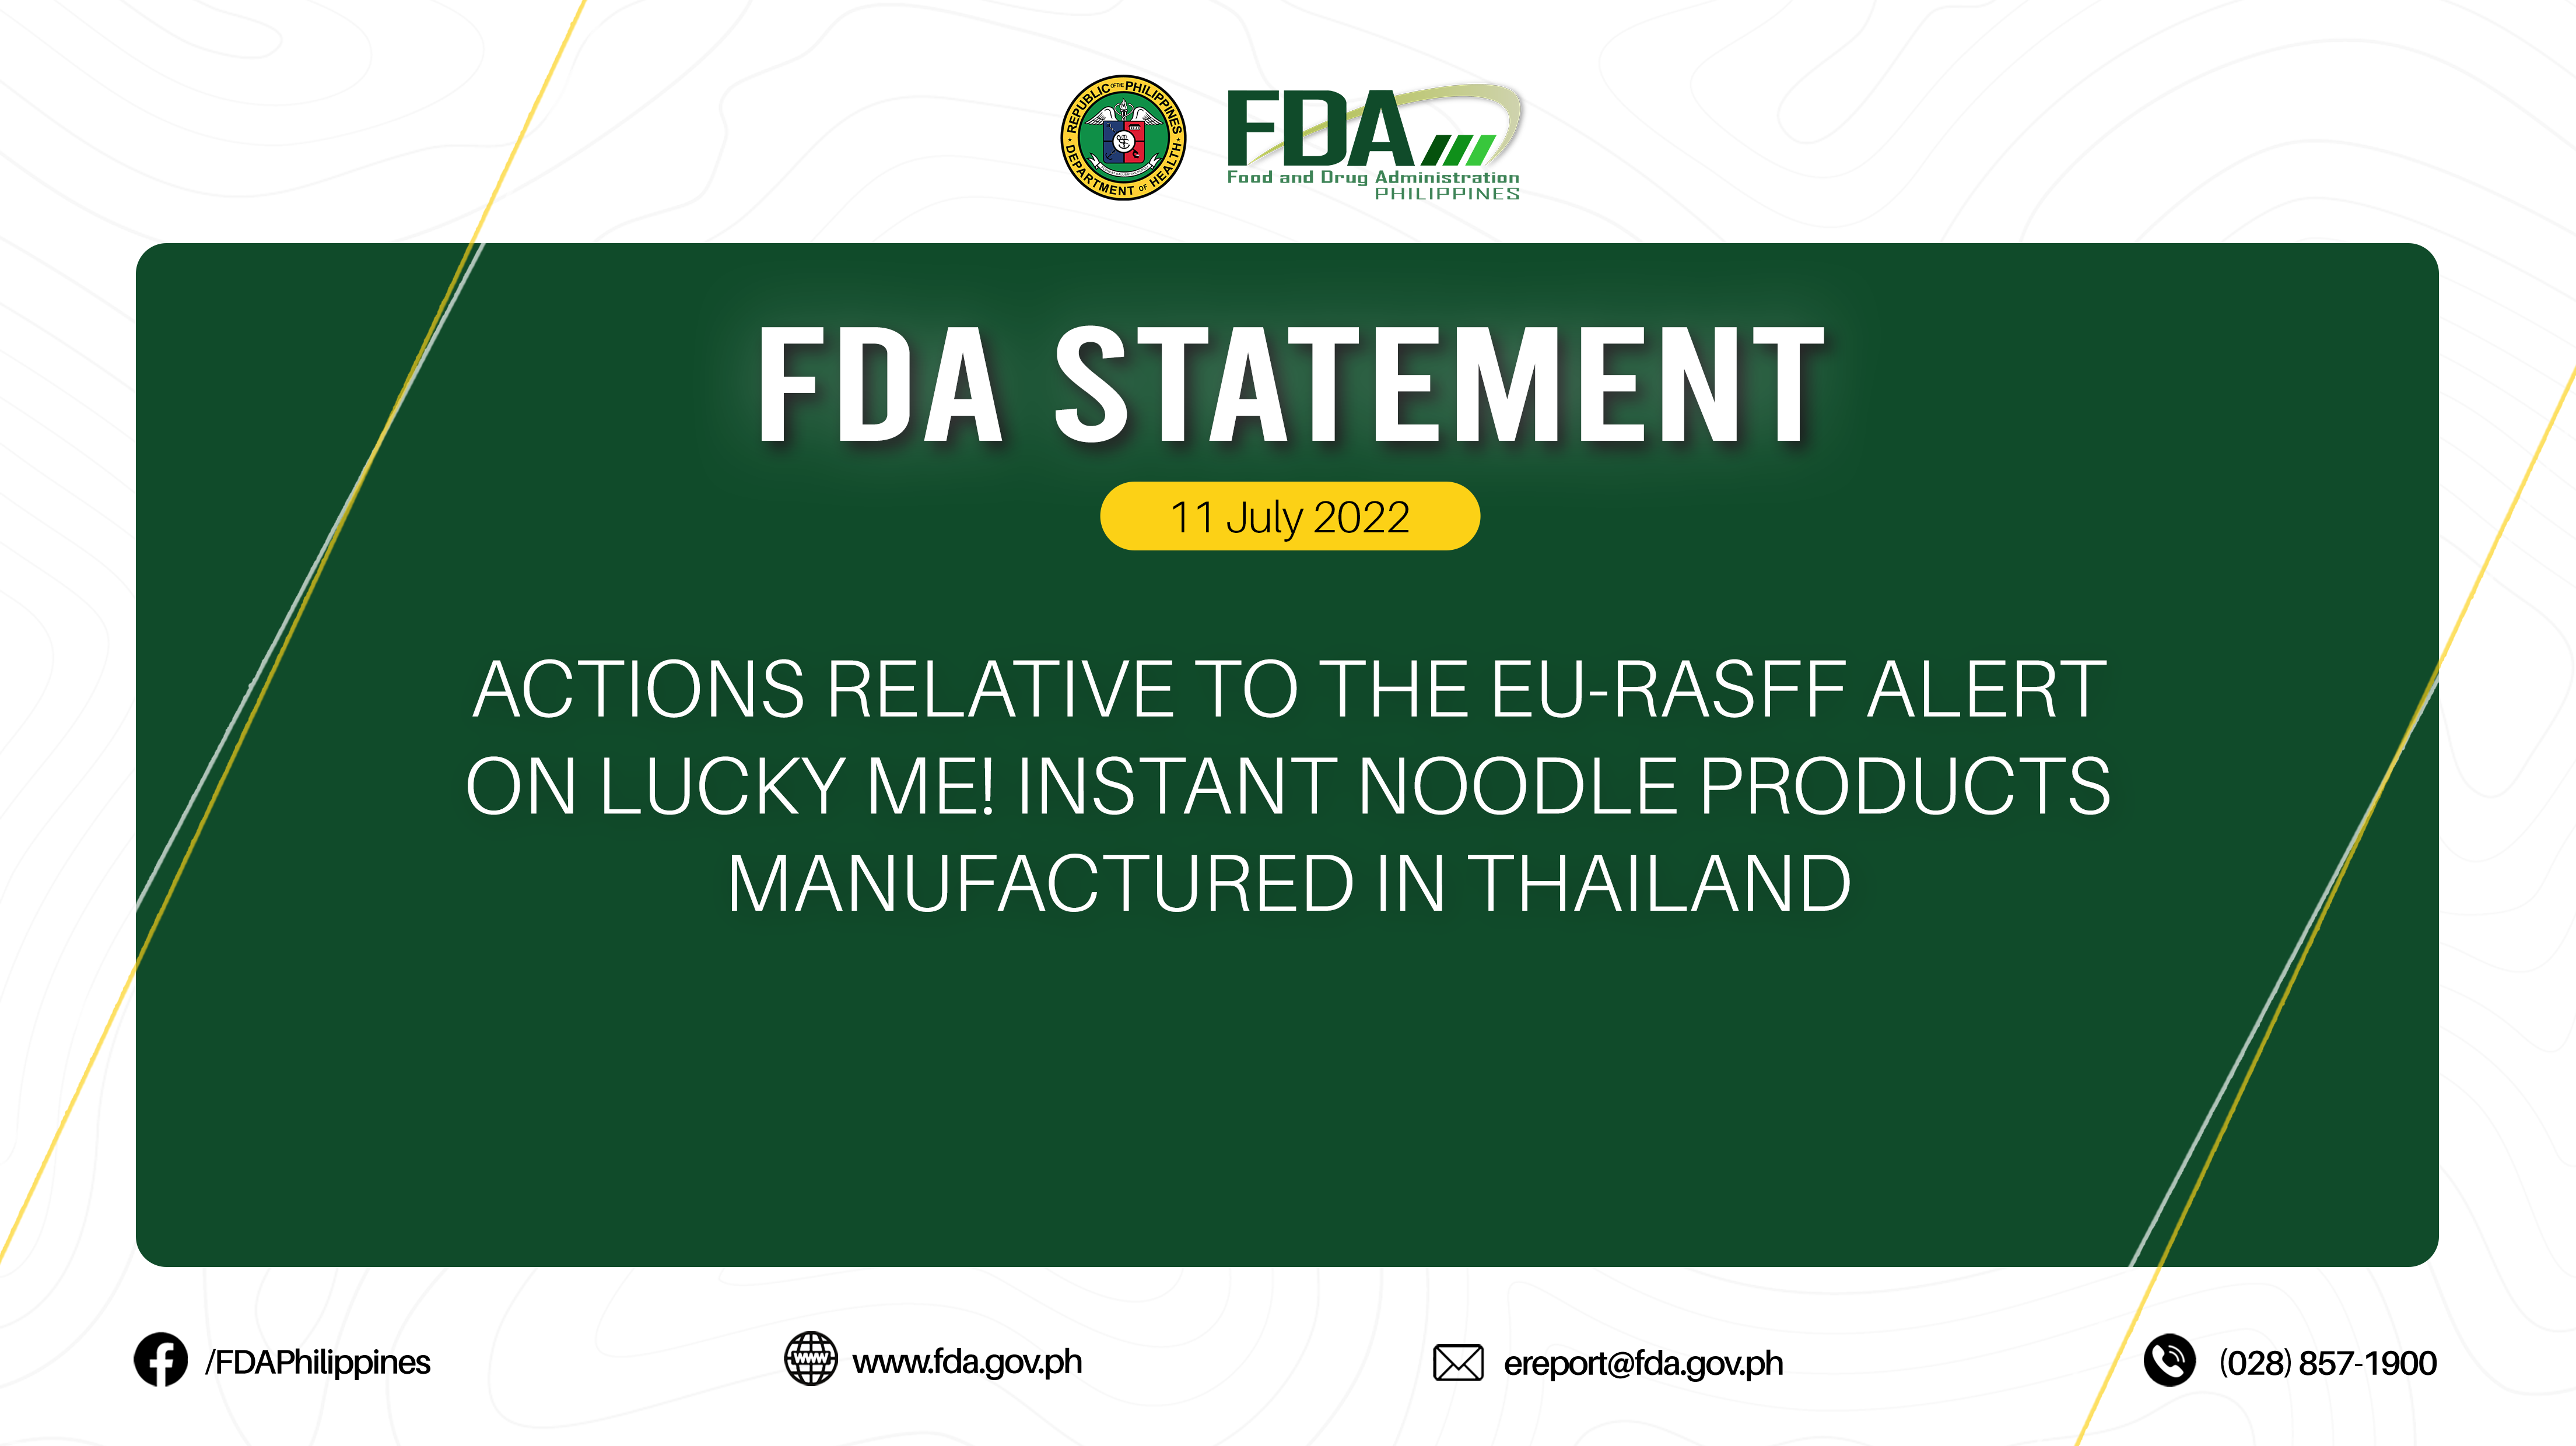 FDA STATEMENT || ACTIONS RELATIVE TO THE EU-RASFF ALERT ON LUCKY ME! INSTANT NOODLE PRODUCTS MANUFACTURED IN THAILAND